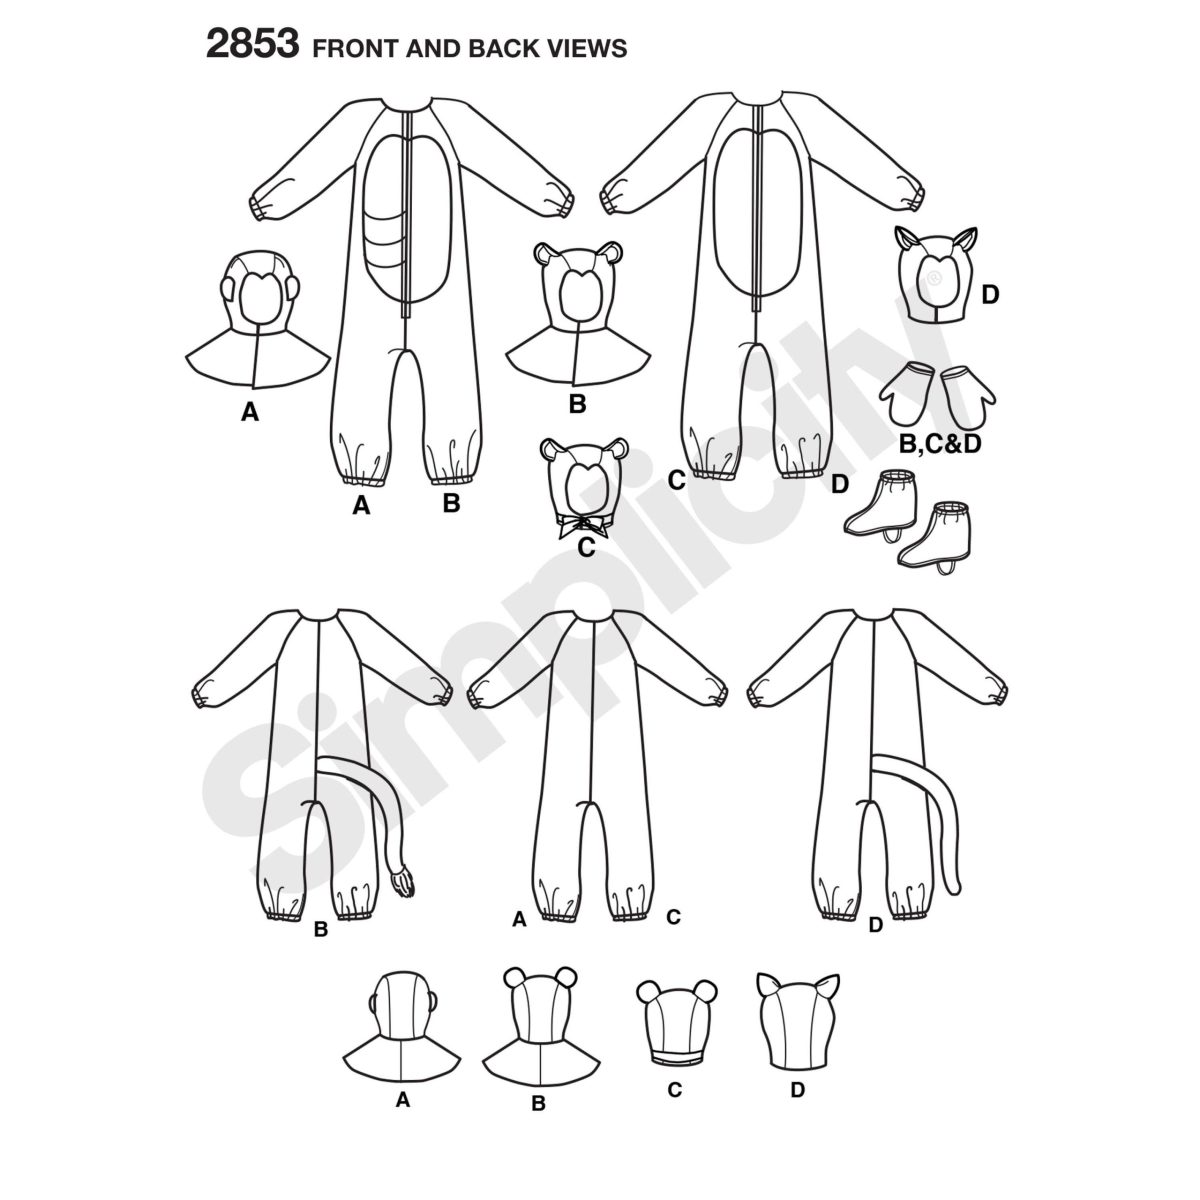 Simplicity Sewing Pattern 2853 Adult Costumes